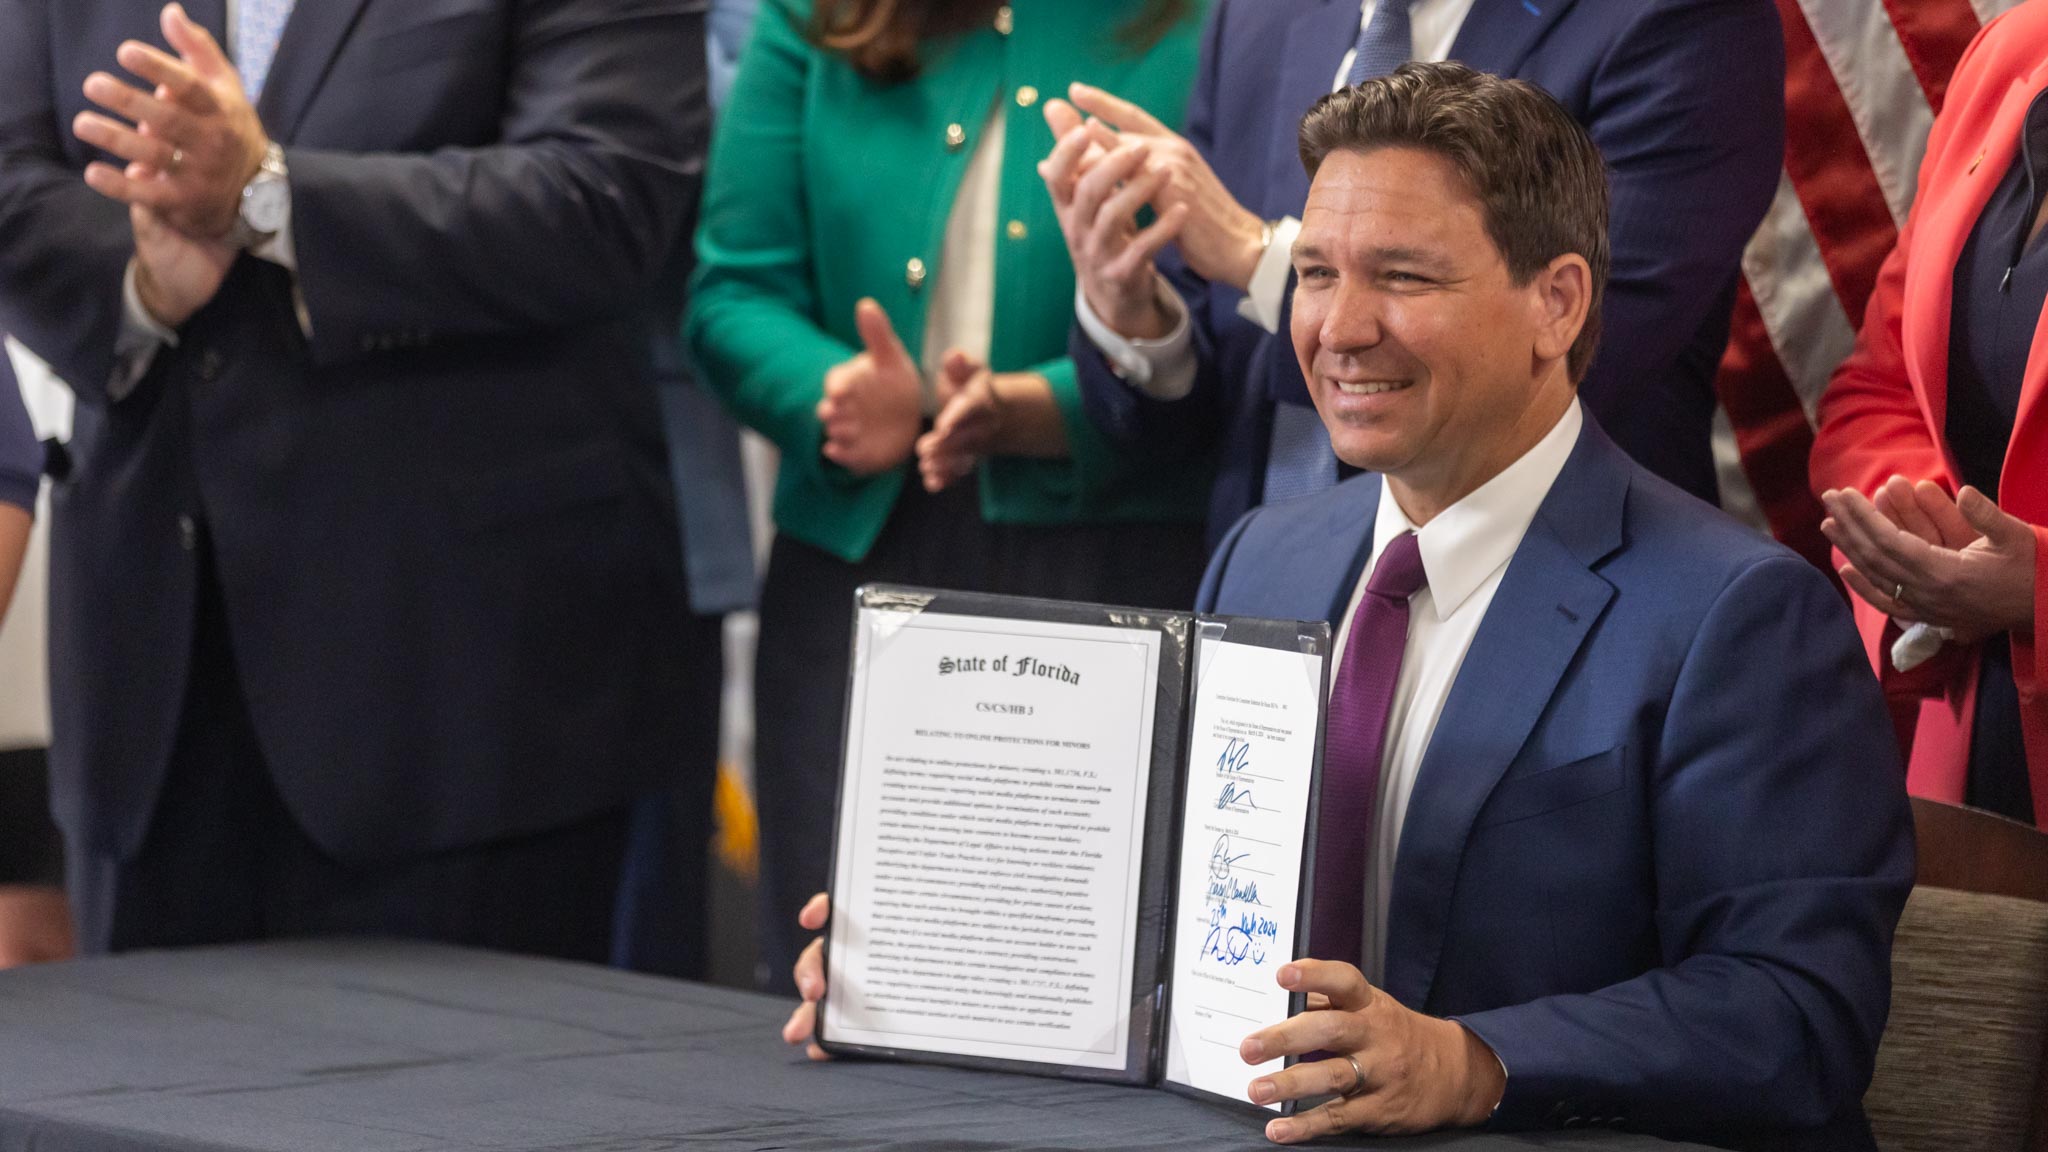 Featured image for “DeSantis comes to Jacksonville to sign social media limits on kids”